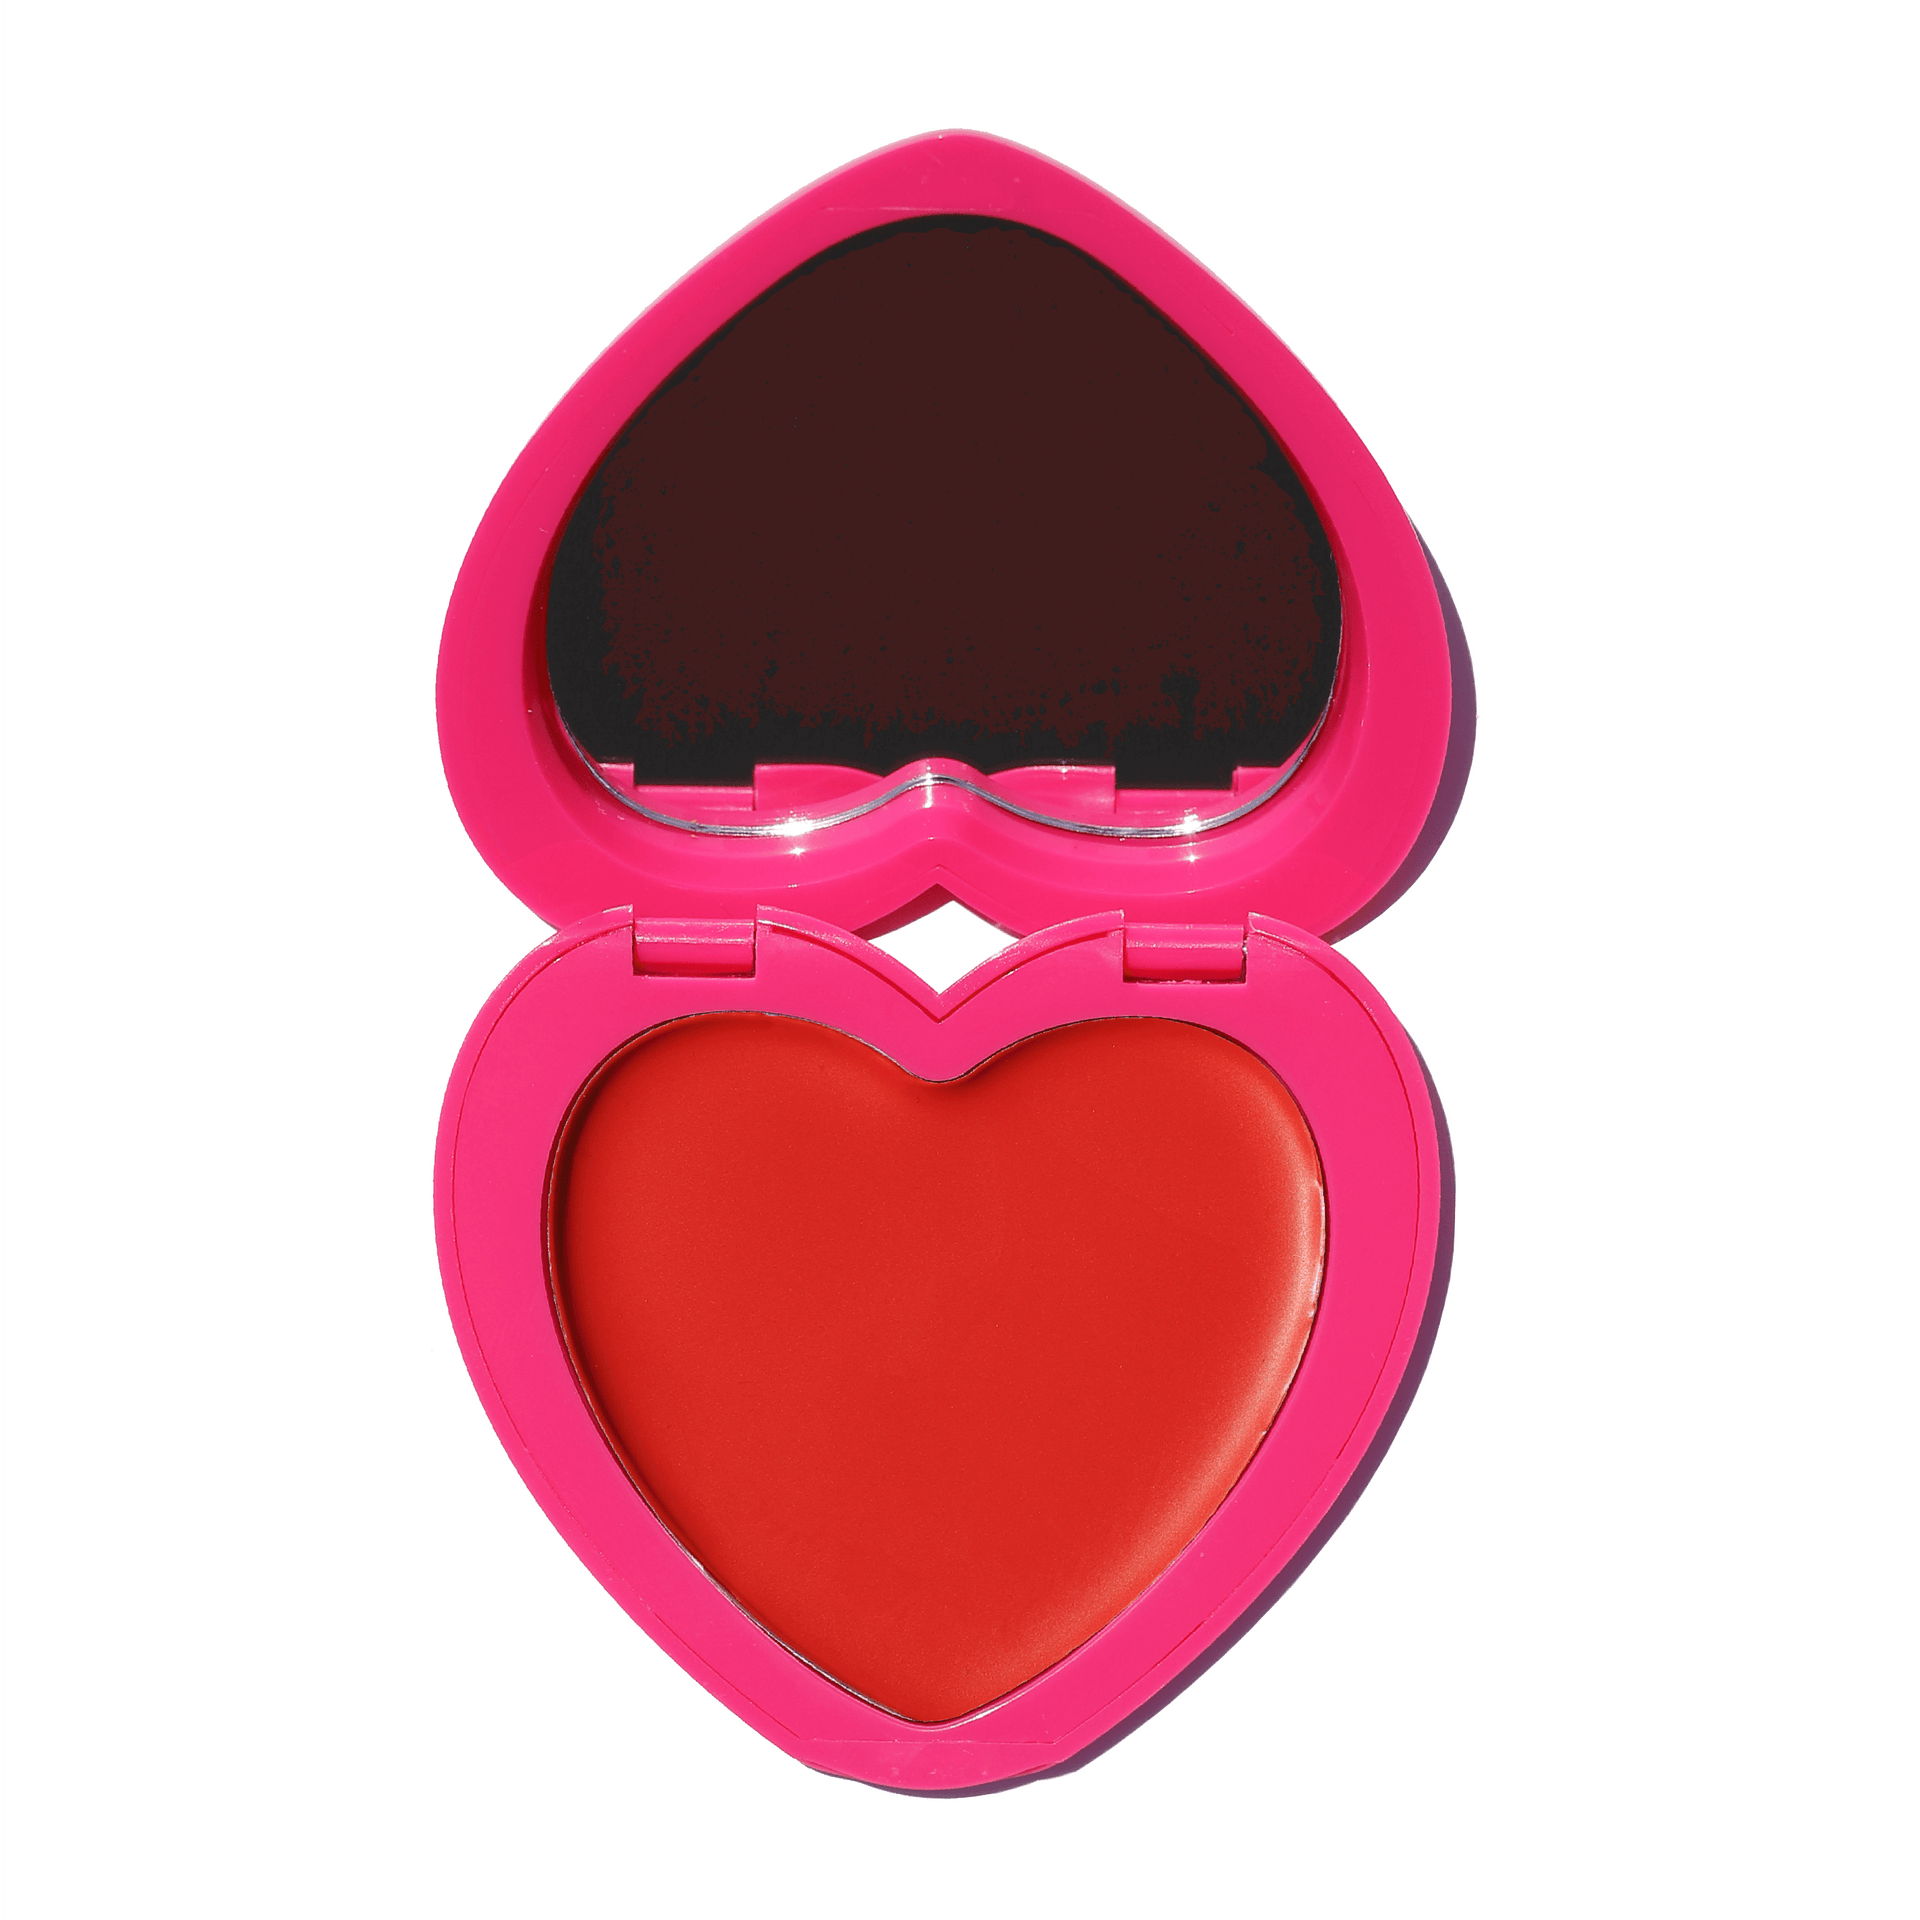 Heart-shaped Candy Paint Cheek + Lip Tint compact in vibrant red shade, showcasing its buildable, blendable cream blush for a dewy, radiant finish.